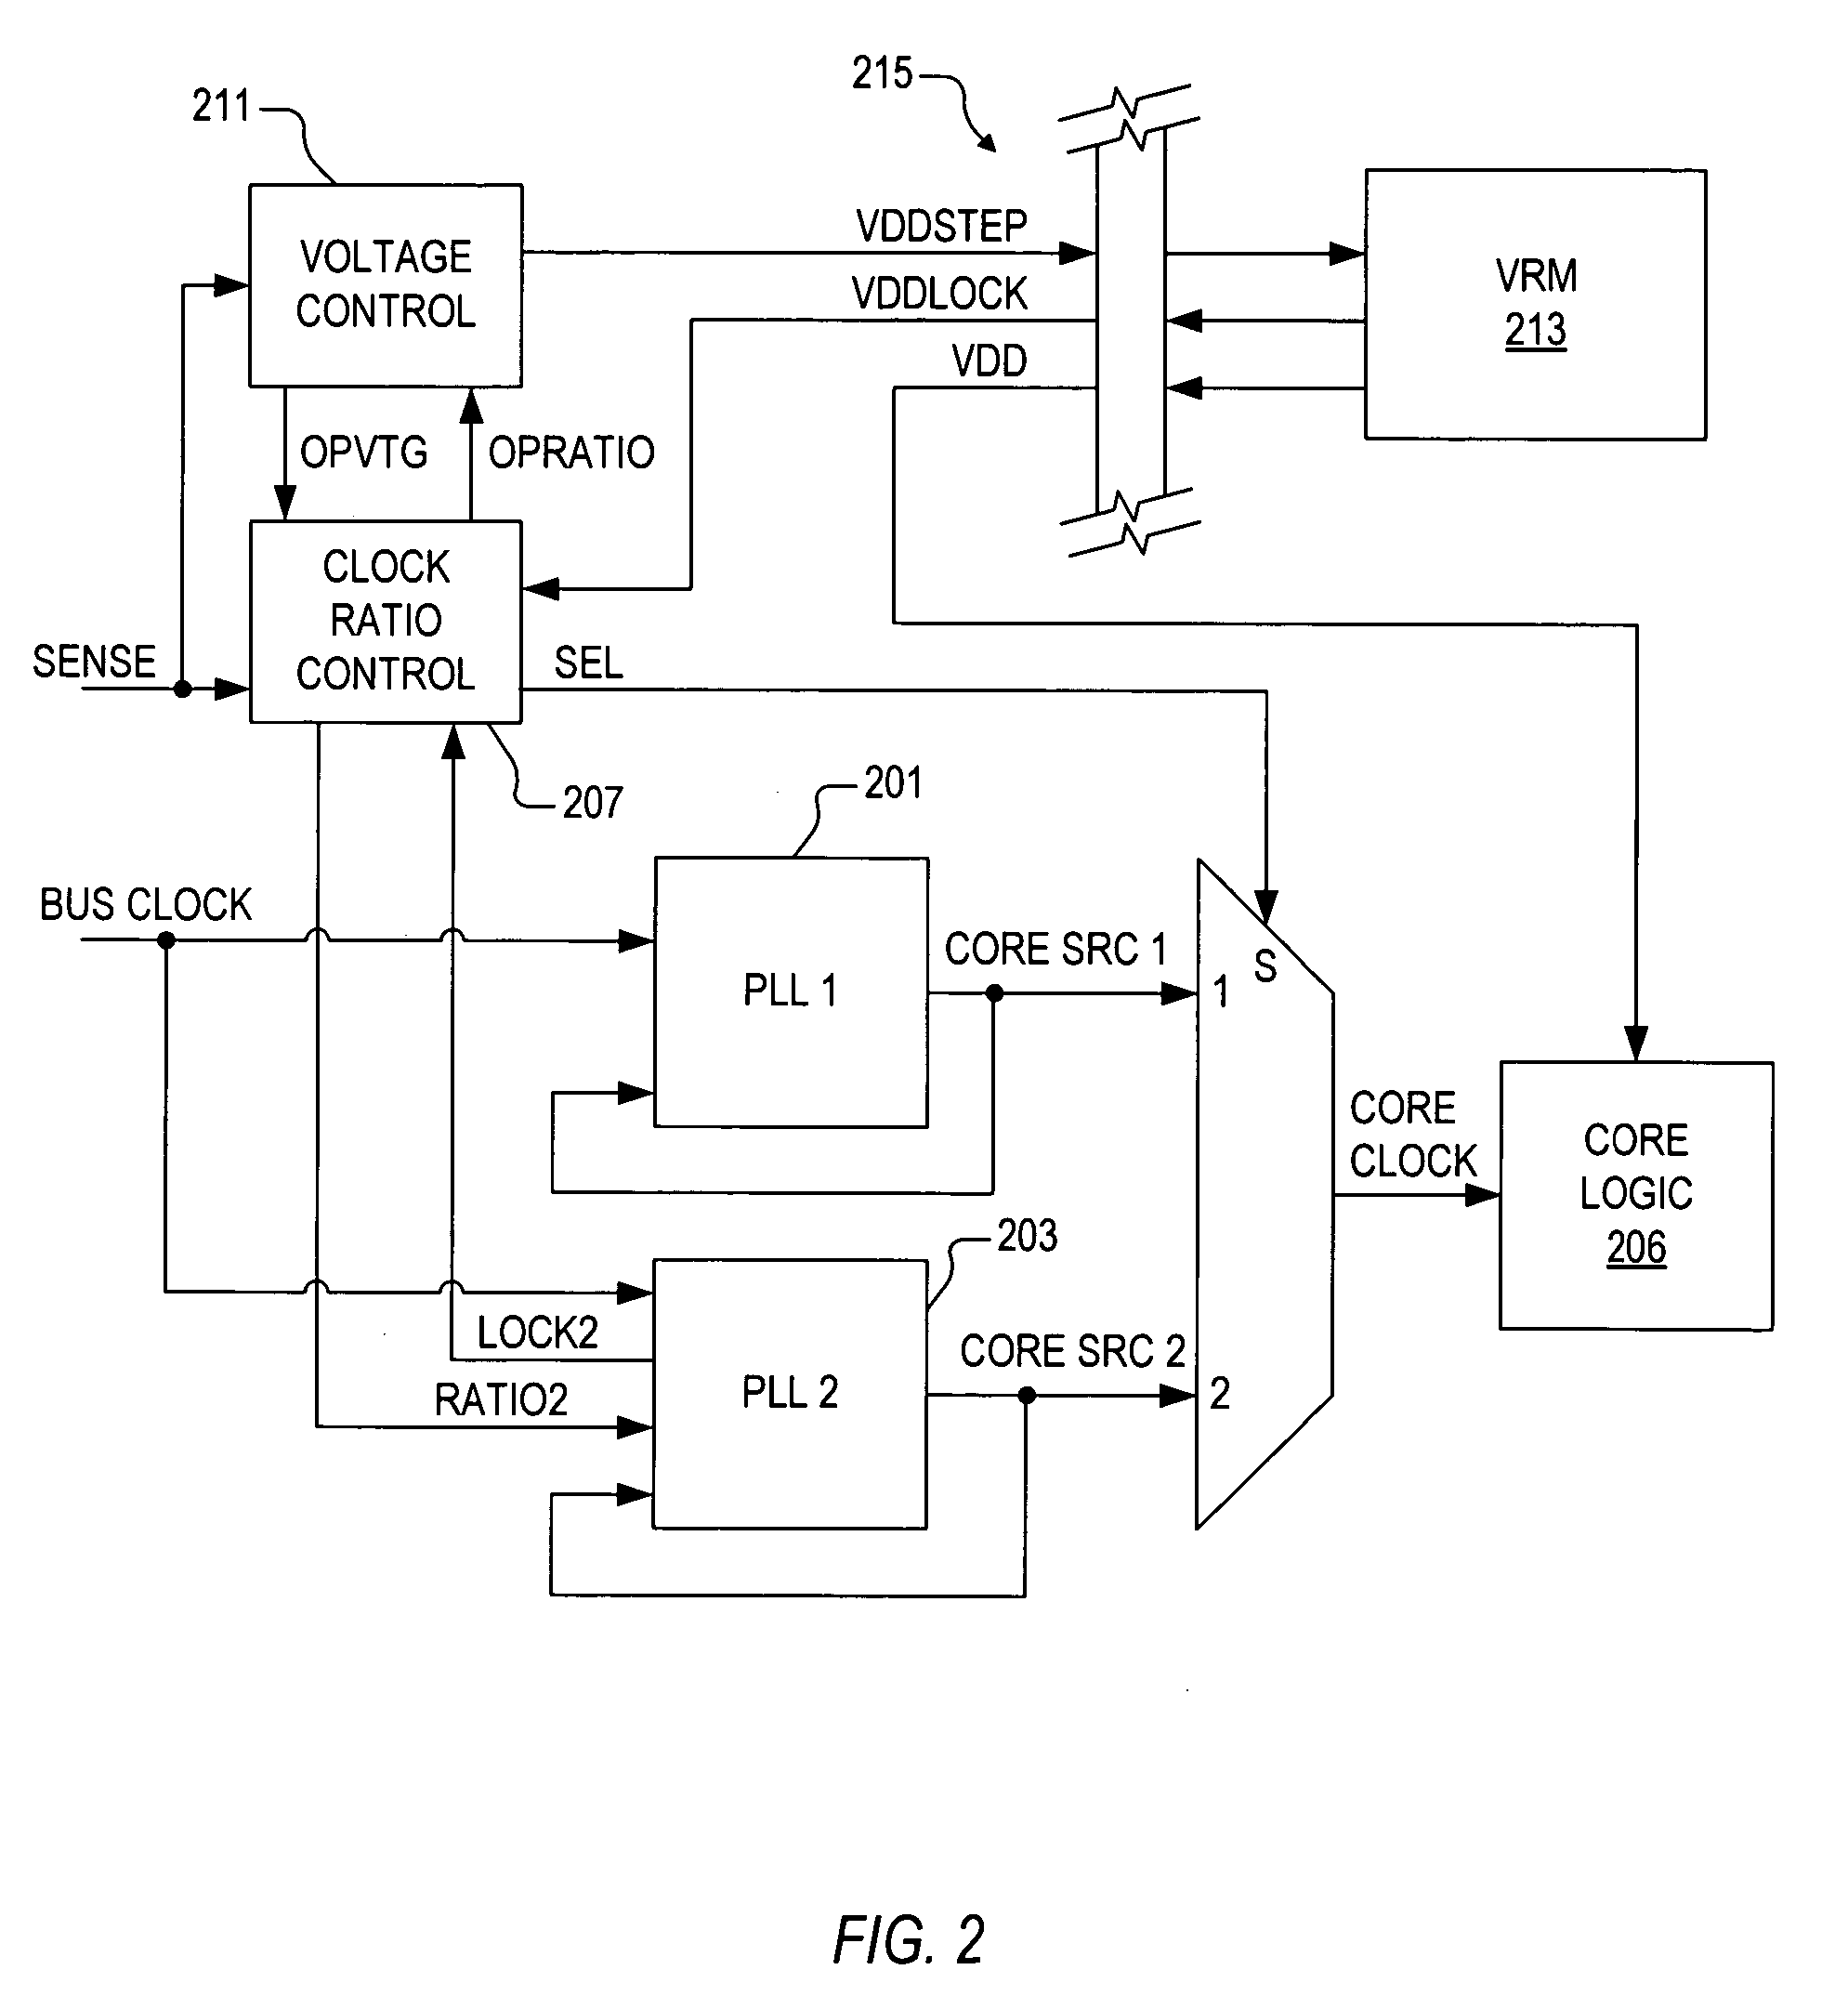 Frequency-voltage mechanism for microprocessor power management